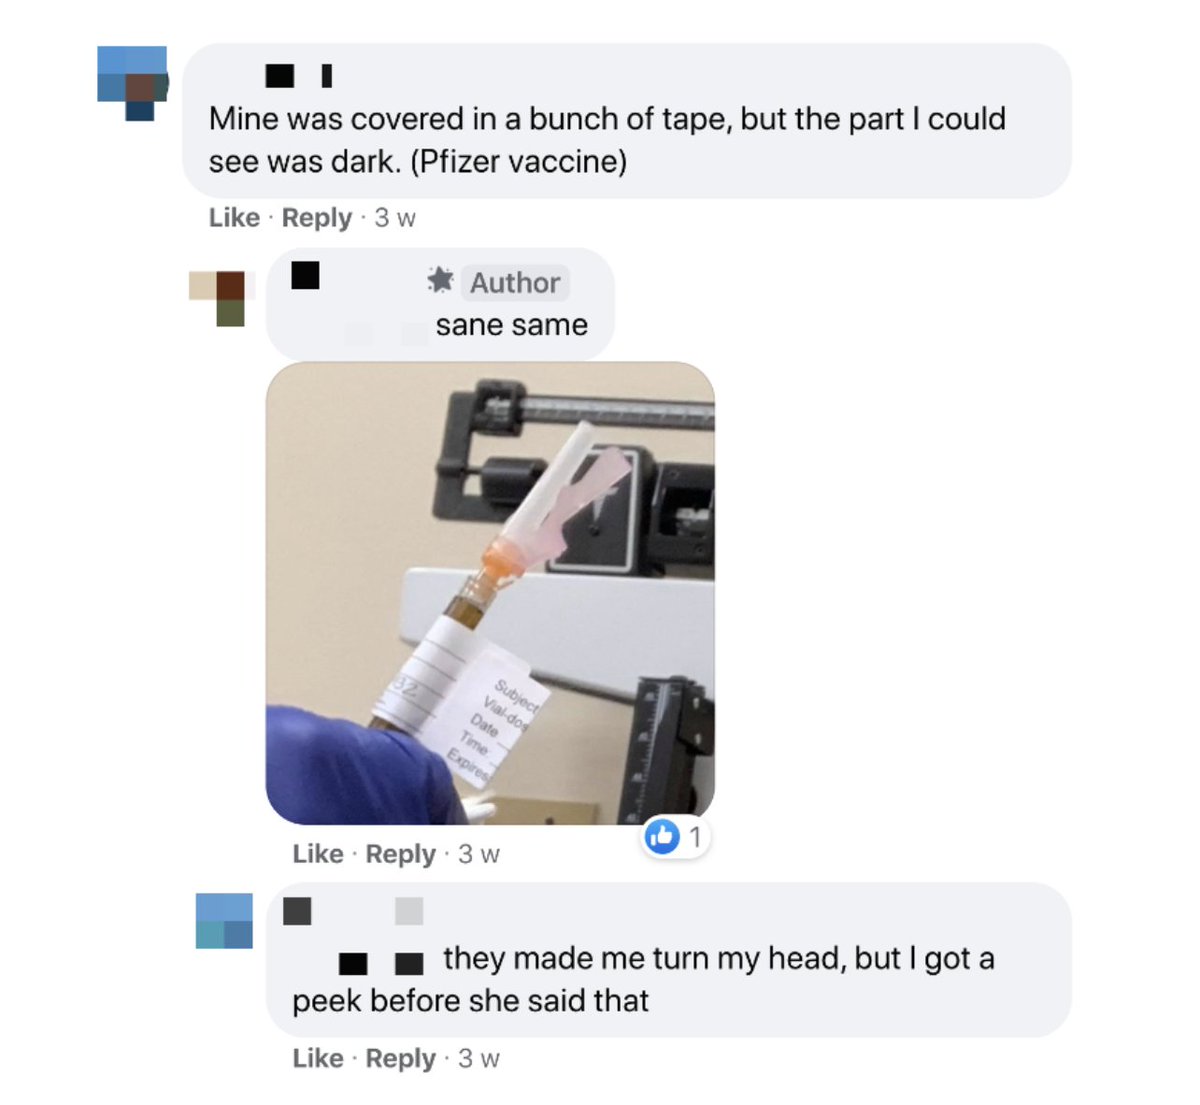 One woman told a Facebook group that her shot during Pfizer vaccine trial “was covered in a bunch of tape, but the part I could see was dark.” A man responded by posting a picture of his vial, partially covered in tape with a dark liquid visible. /19